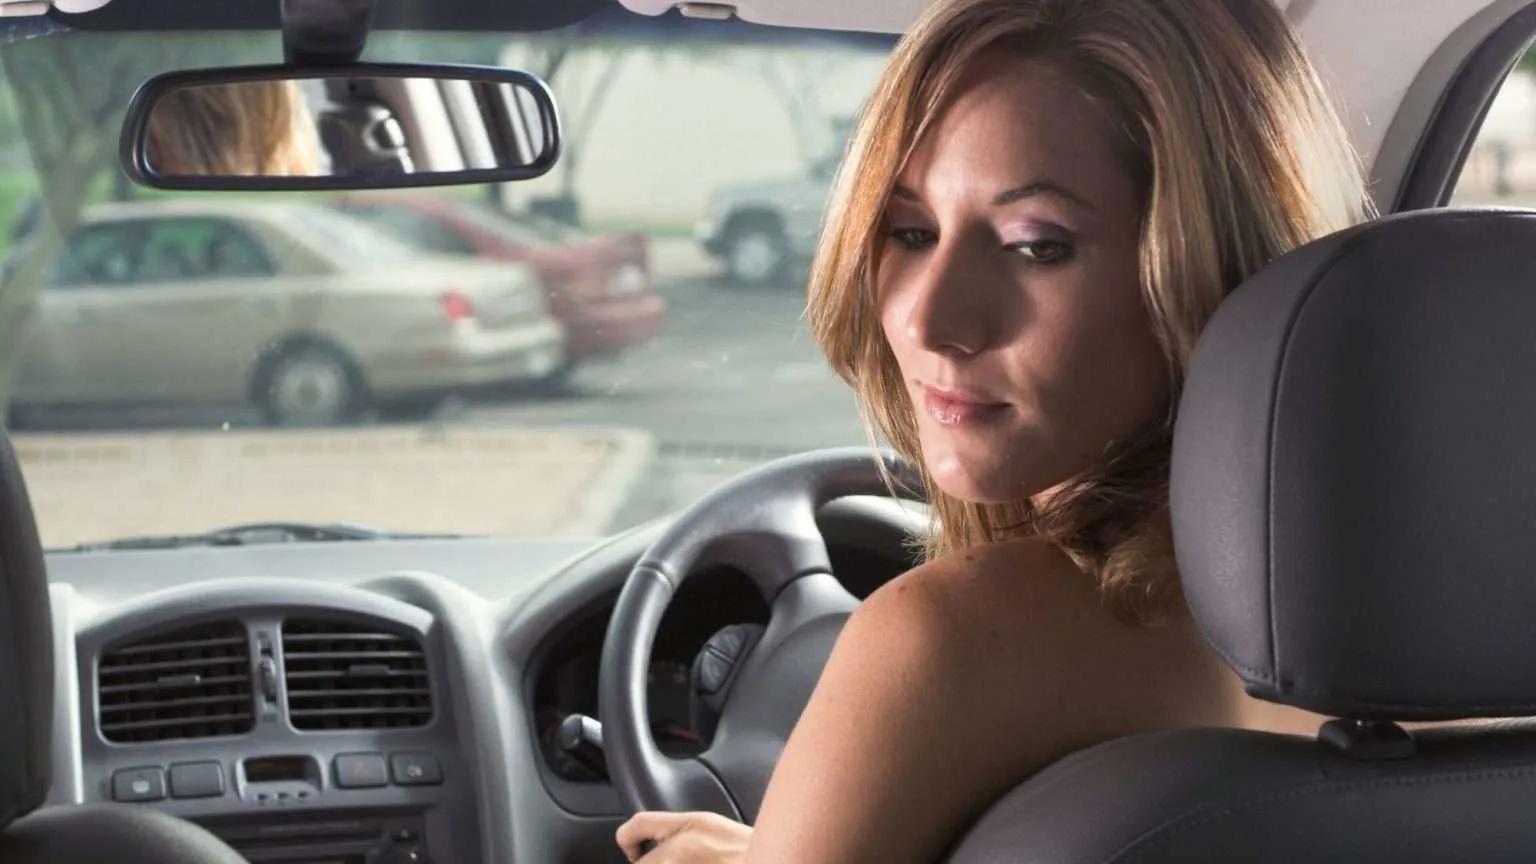 courtney meek add photo driving a car naked